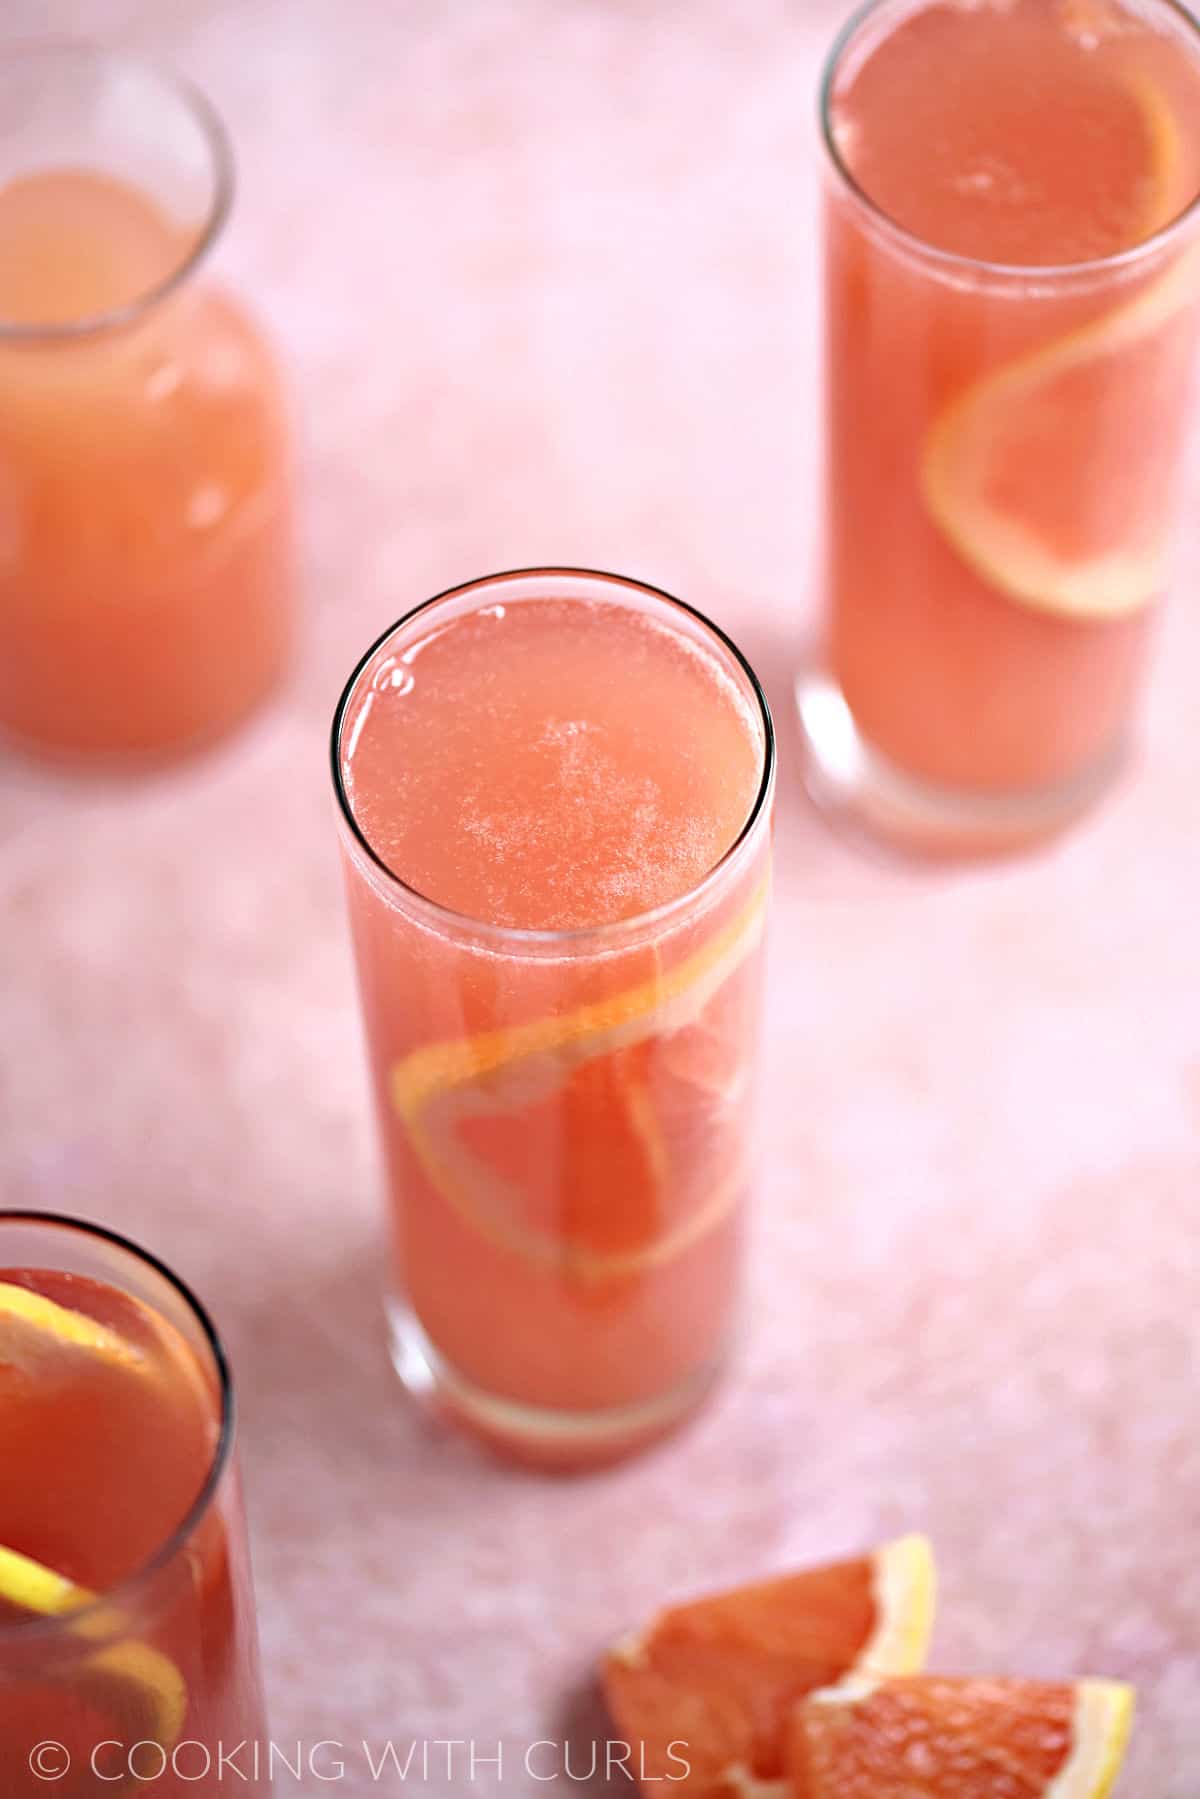 Looking down on three skinny glasses filled with ruby red grapefruit juice, rose champagne, and a thin slice of grapefruit with a carafe of grapefruit juice on the side.